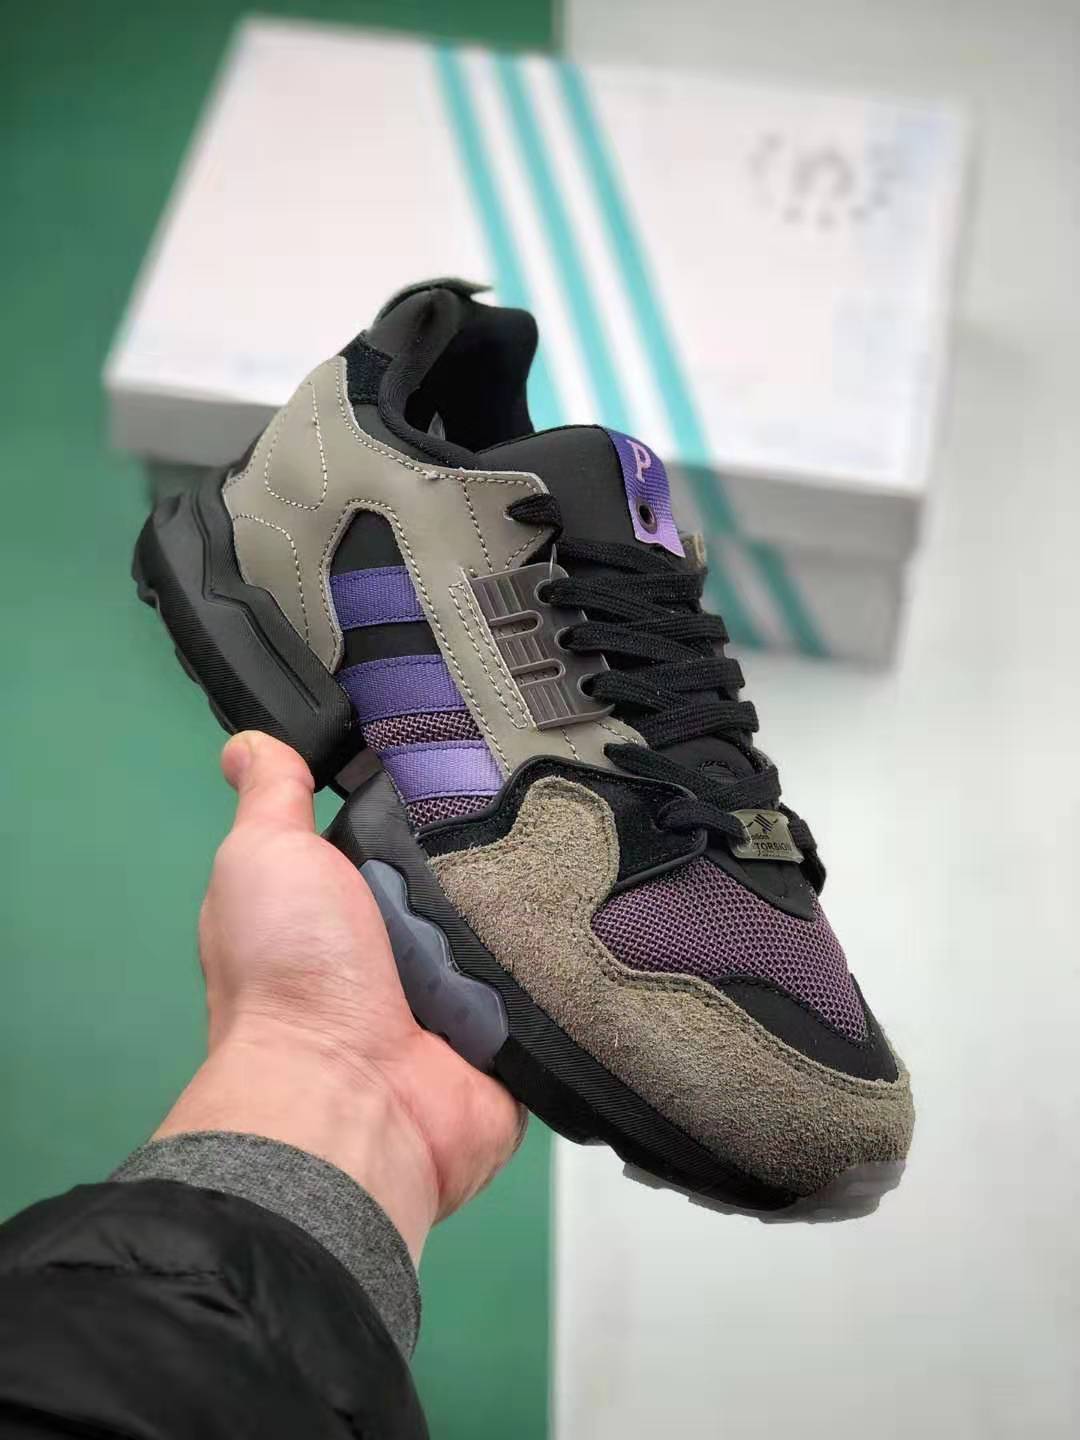 Adidas Packer x Consortium ZX Torsion 'Mega Violet' EF7734 - Exclusive Collaboration for Sneaker Enthusiasts